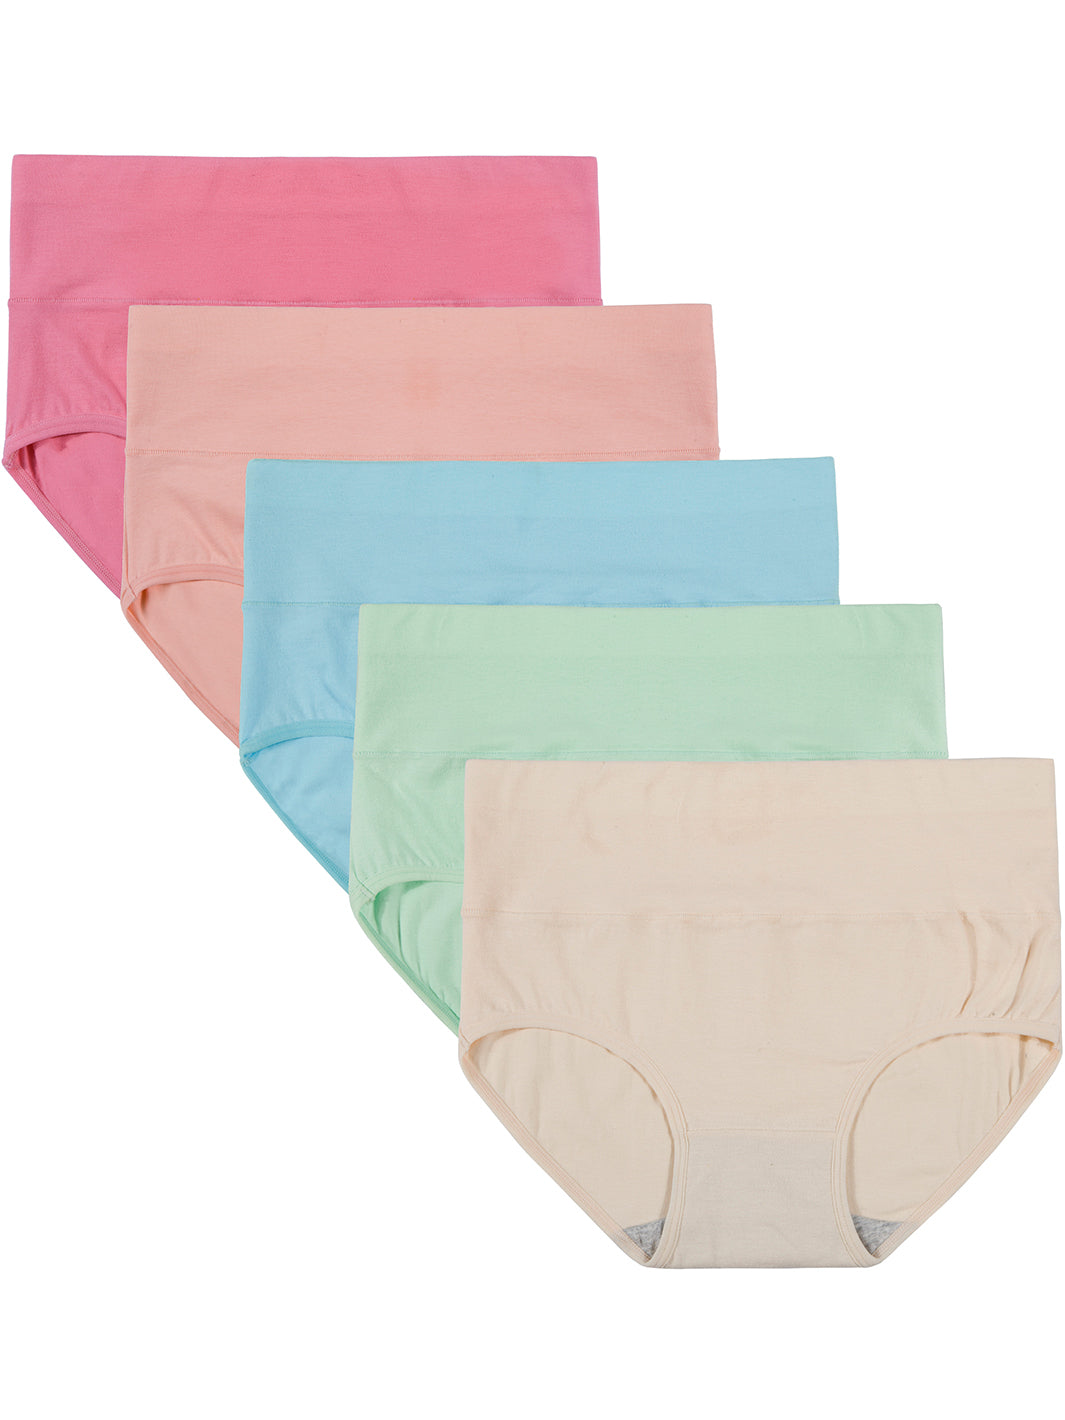 Thong Undies 5 Pack by Lotus Tribe 5 Cotton Women's G Strings in